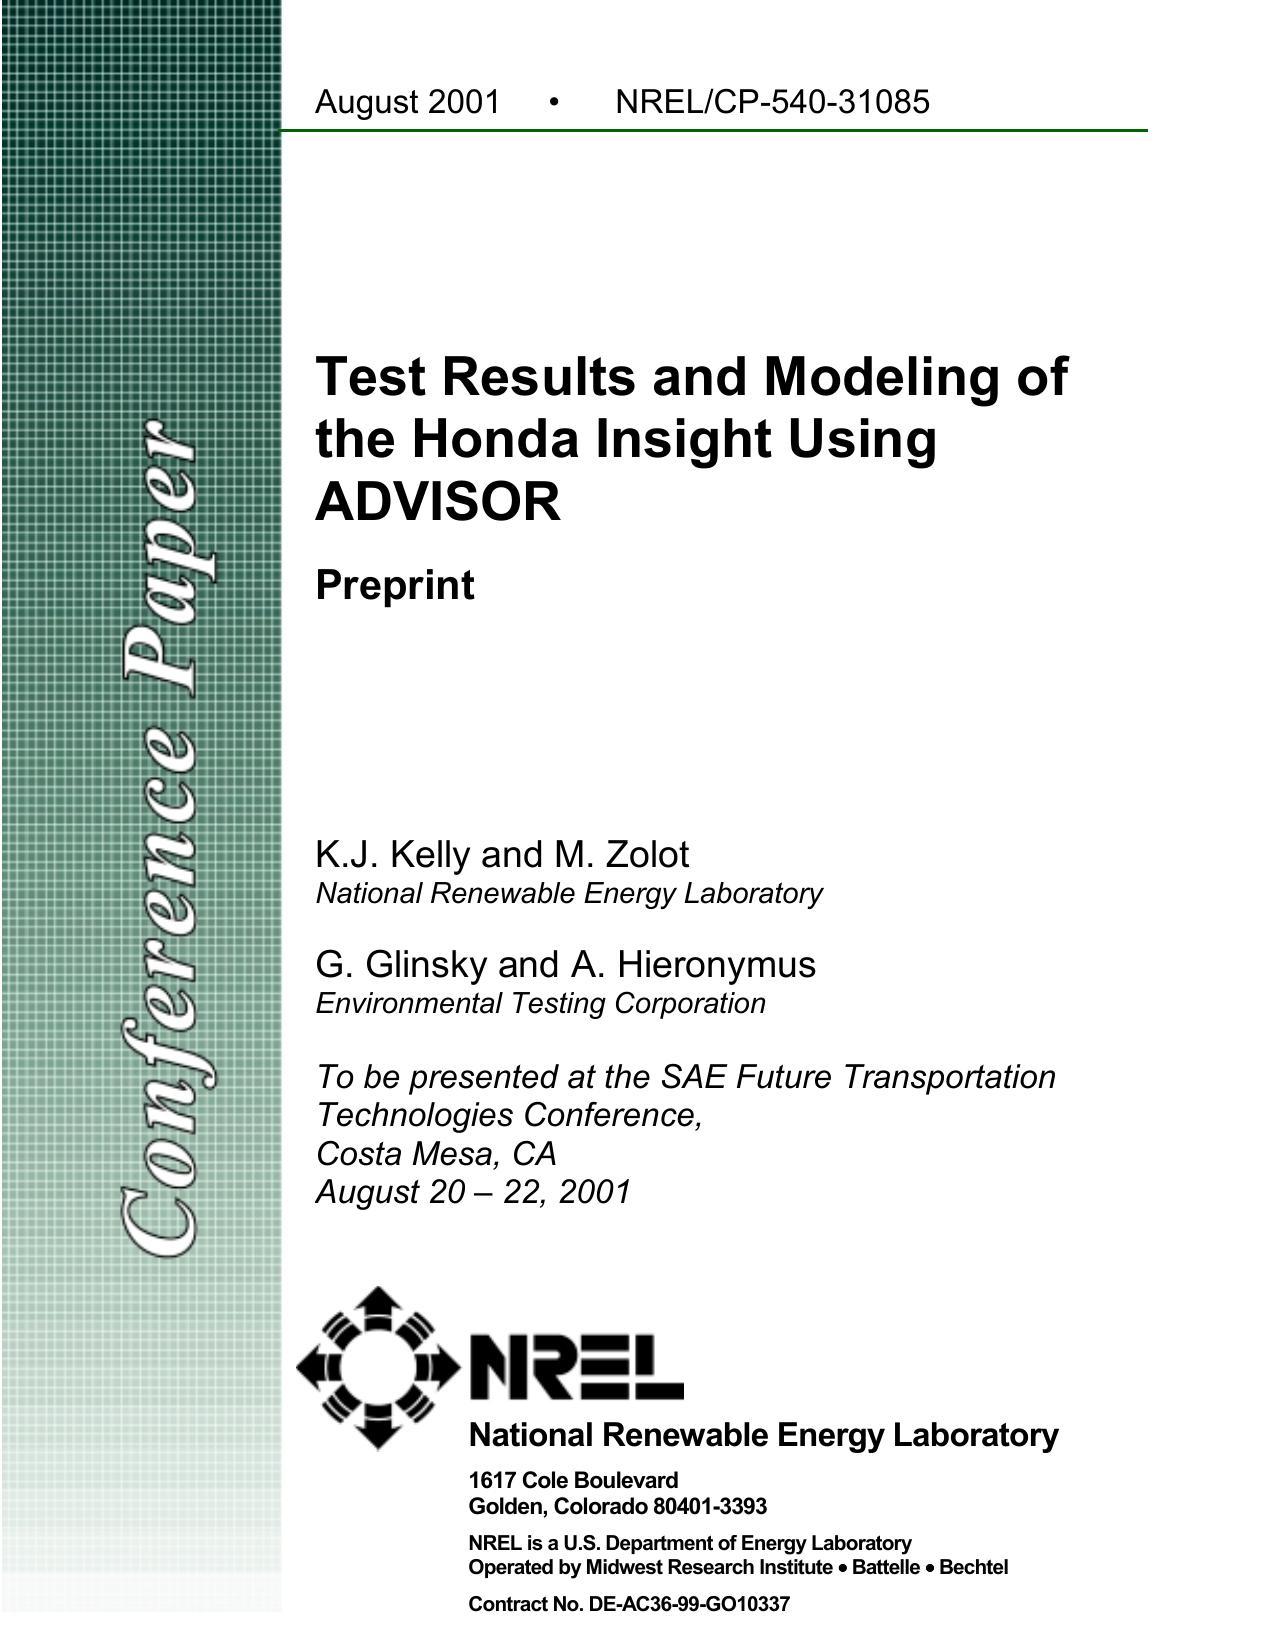 test-results-and-modeling-of-the-2000-honda-insight-using-advisor.pdf